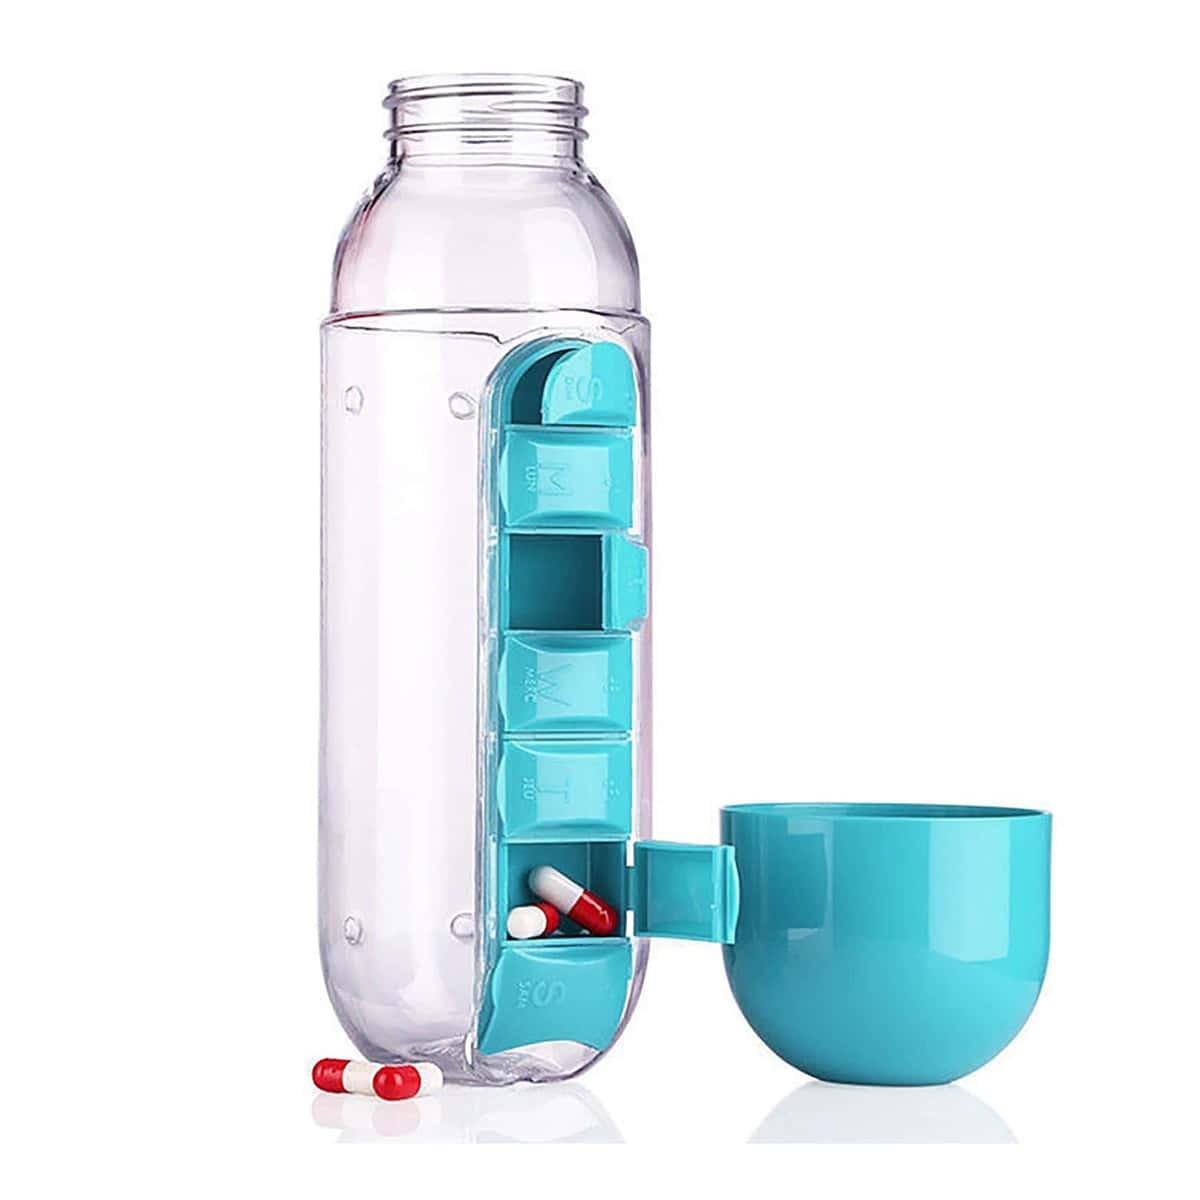 1pc Creative Water Bottle With 7-day Pill Box 2-in-1 Portable Bottle For Outdoor23*7.5cm/9.06*2.95inch